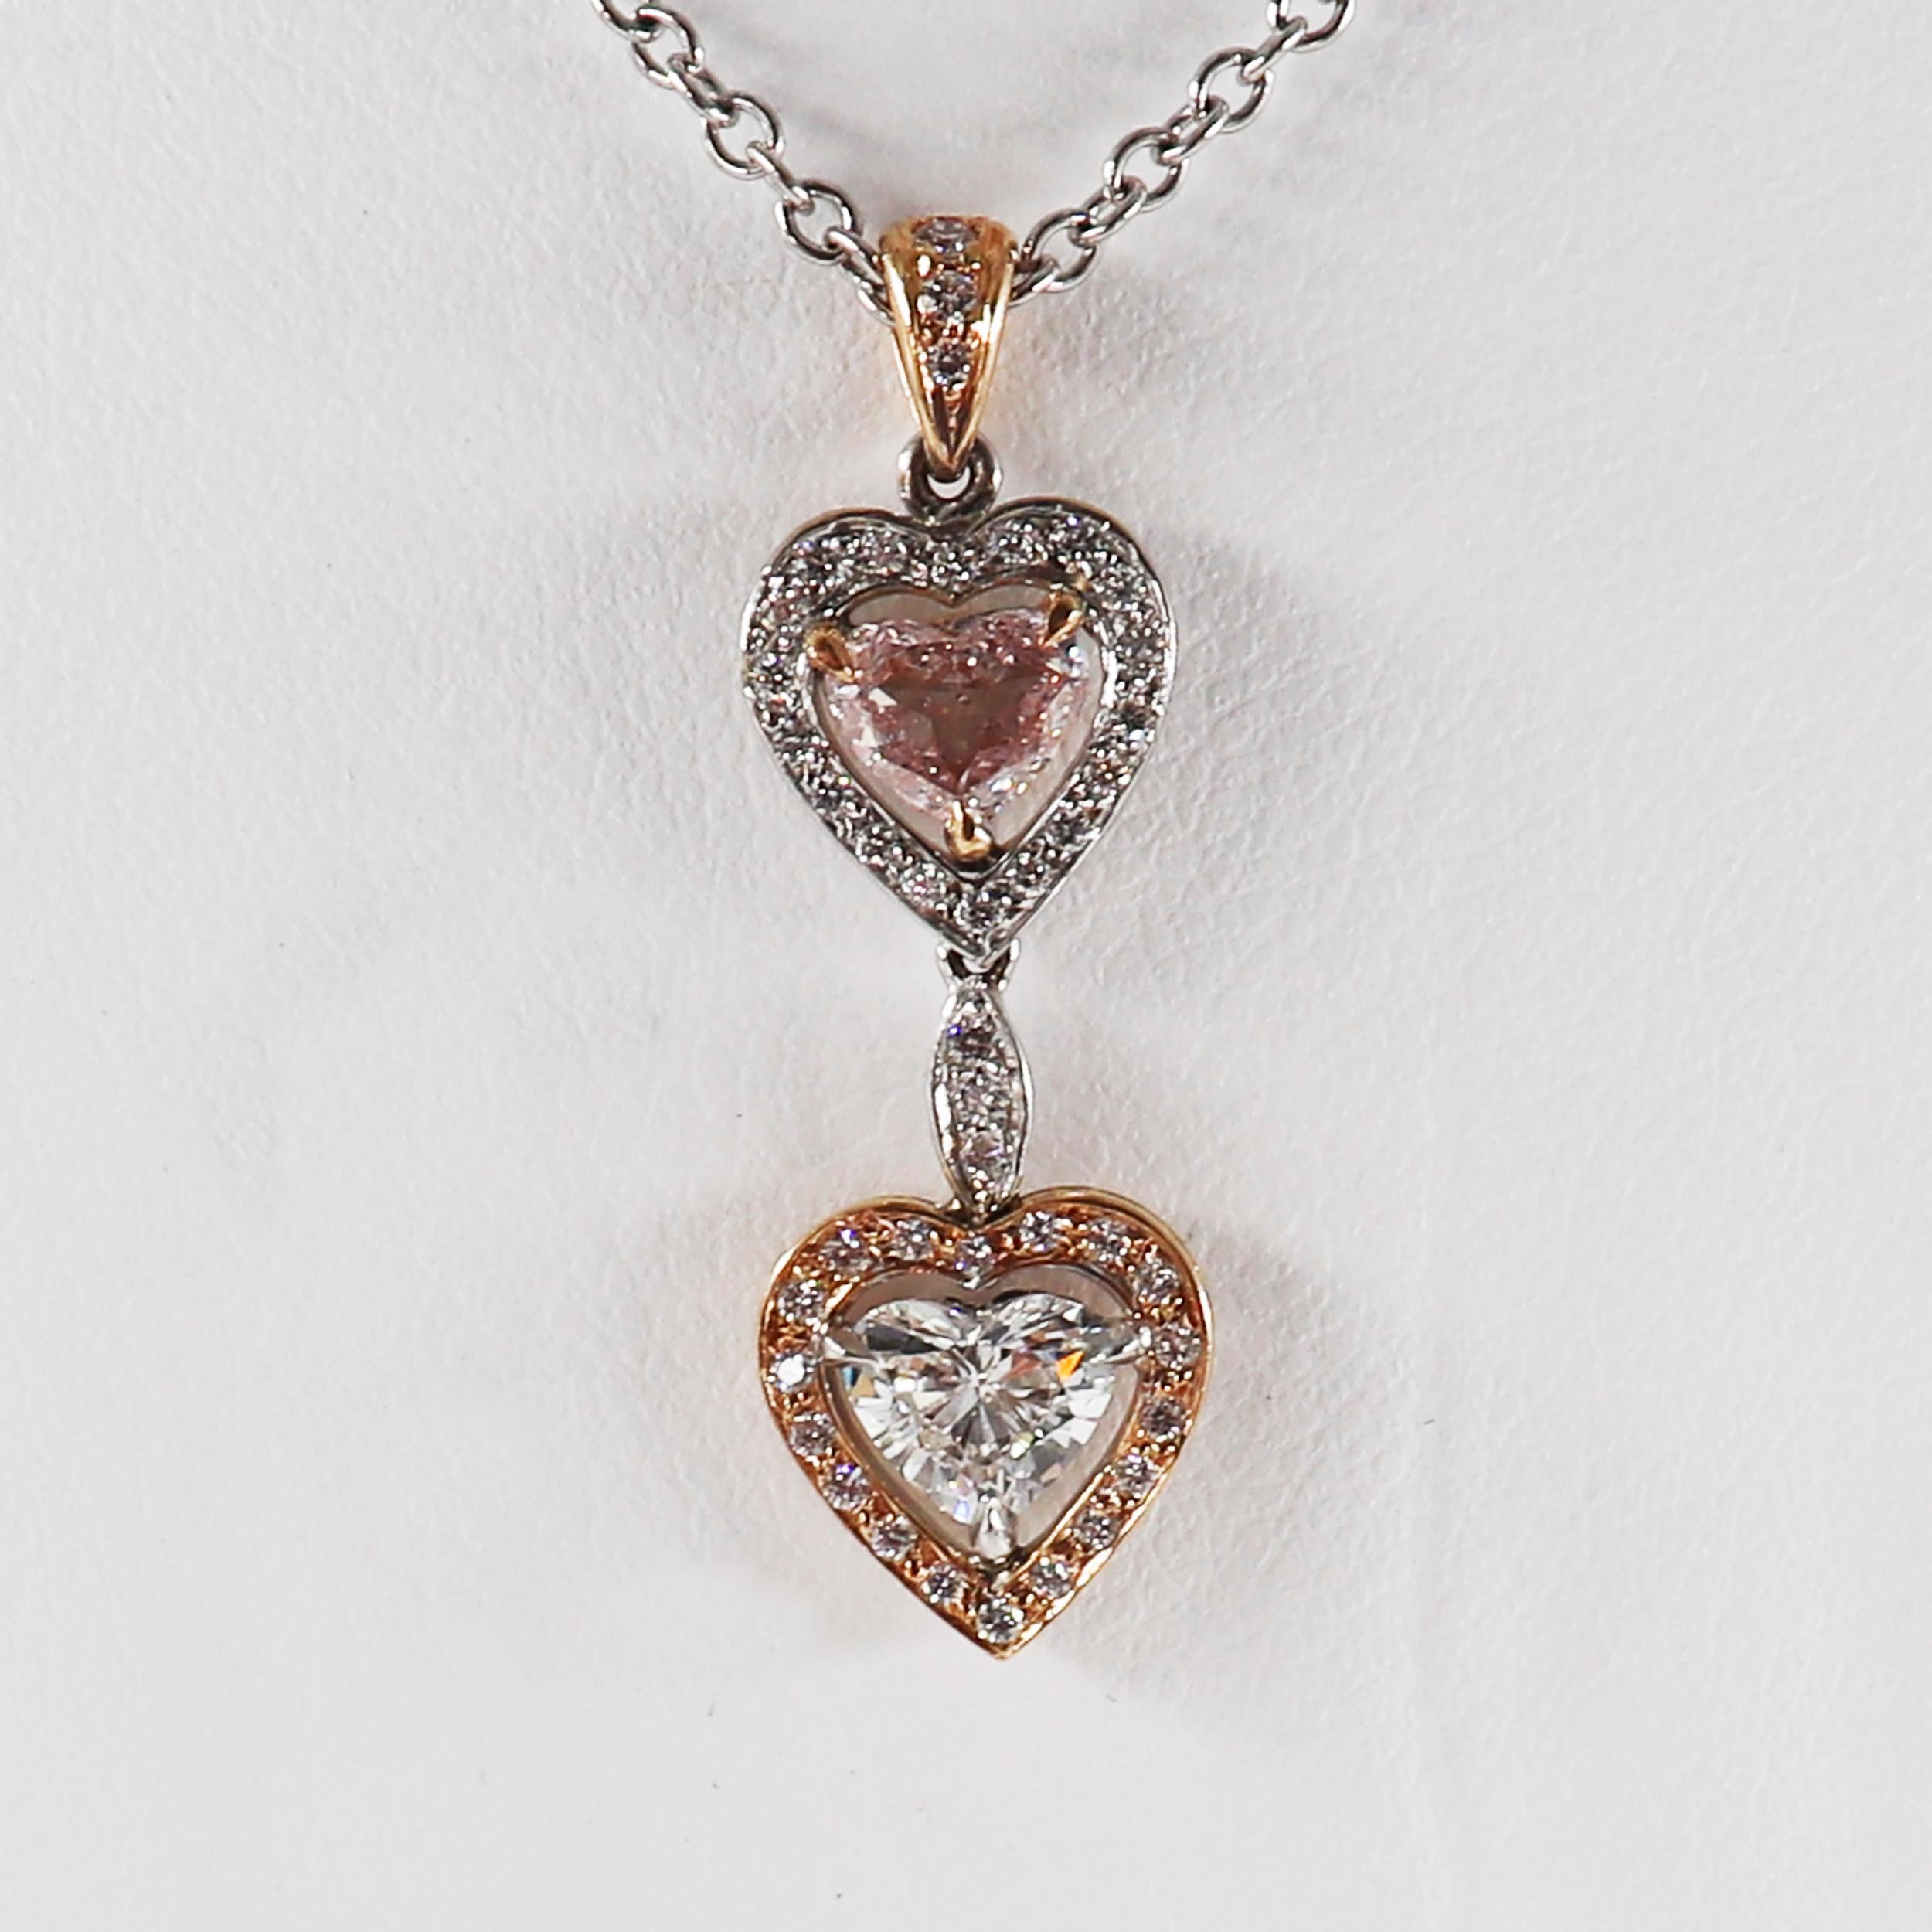 Modern Charming Heart Shaped Pendant Necklace For Sale